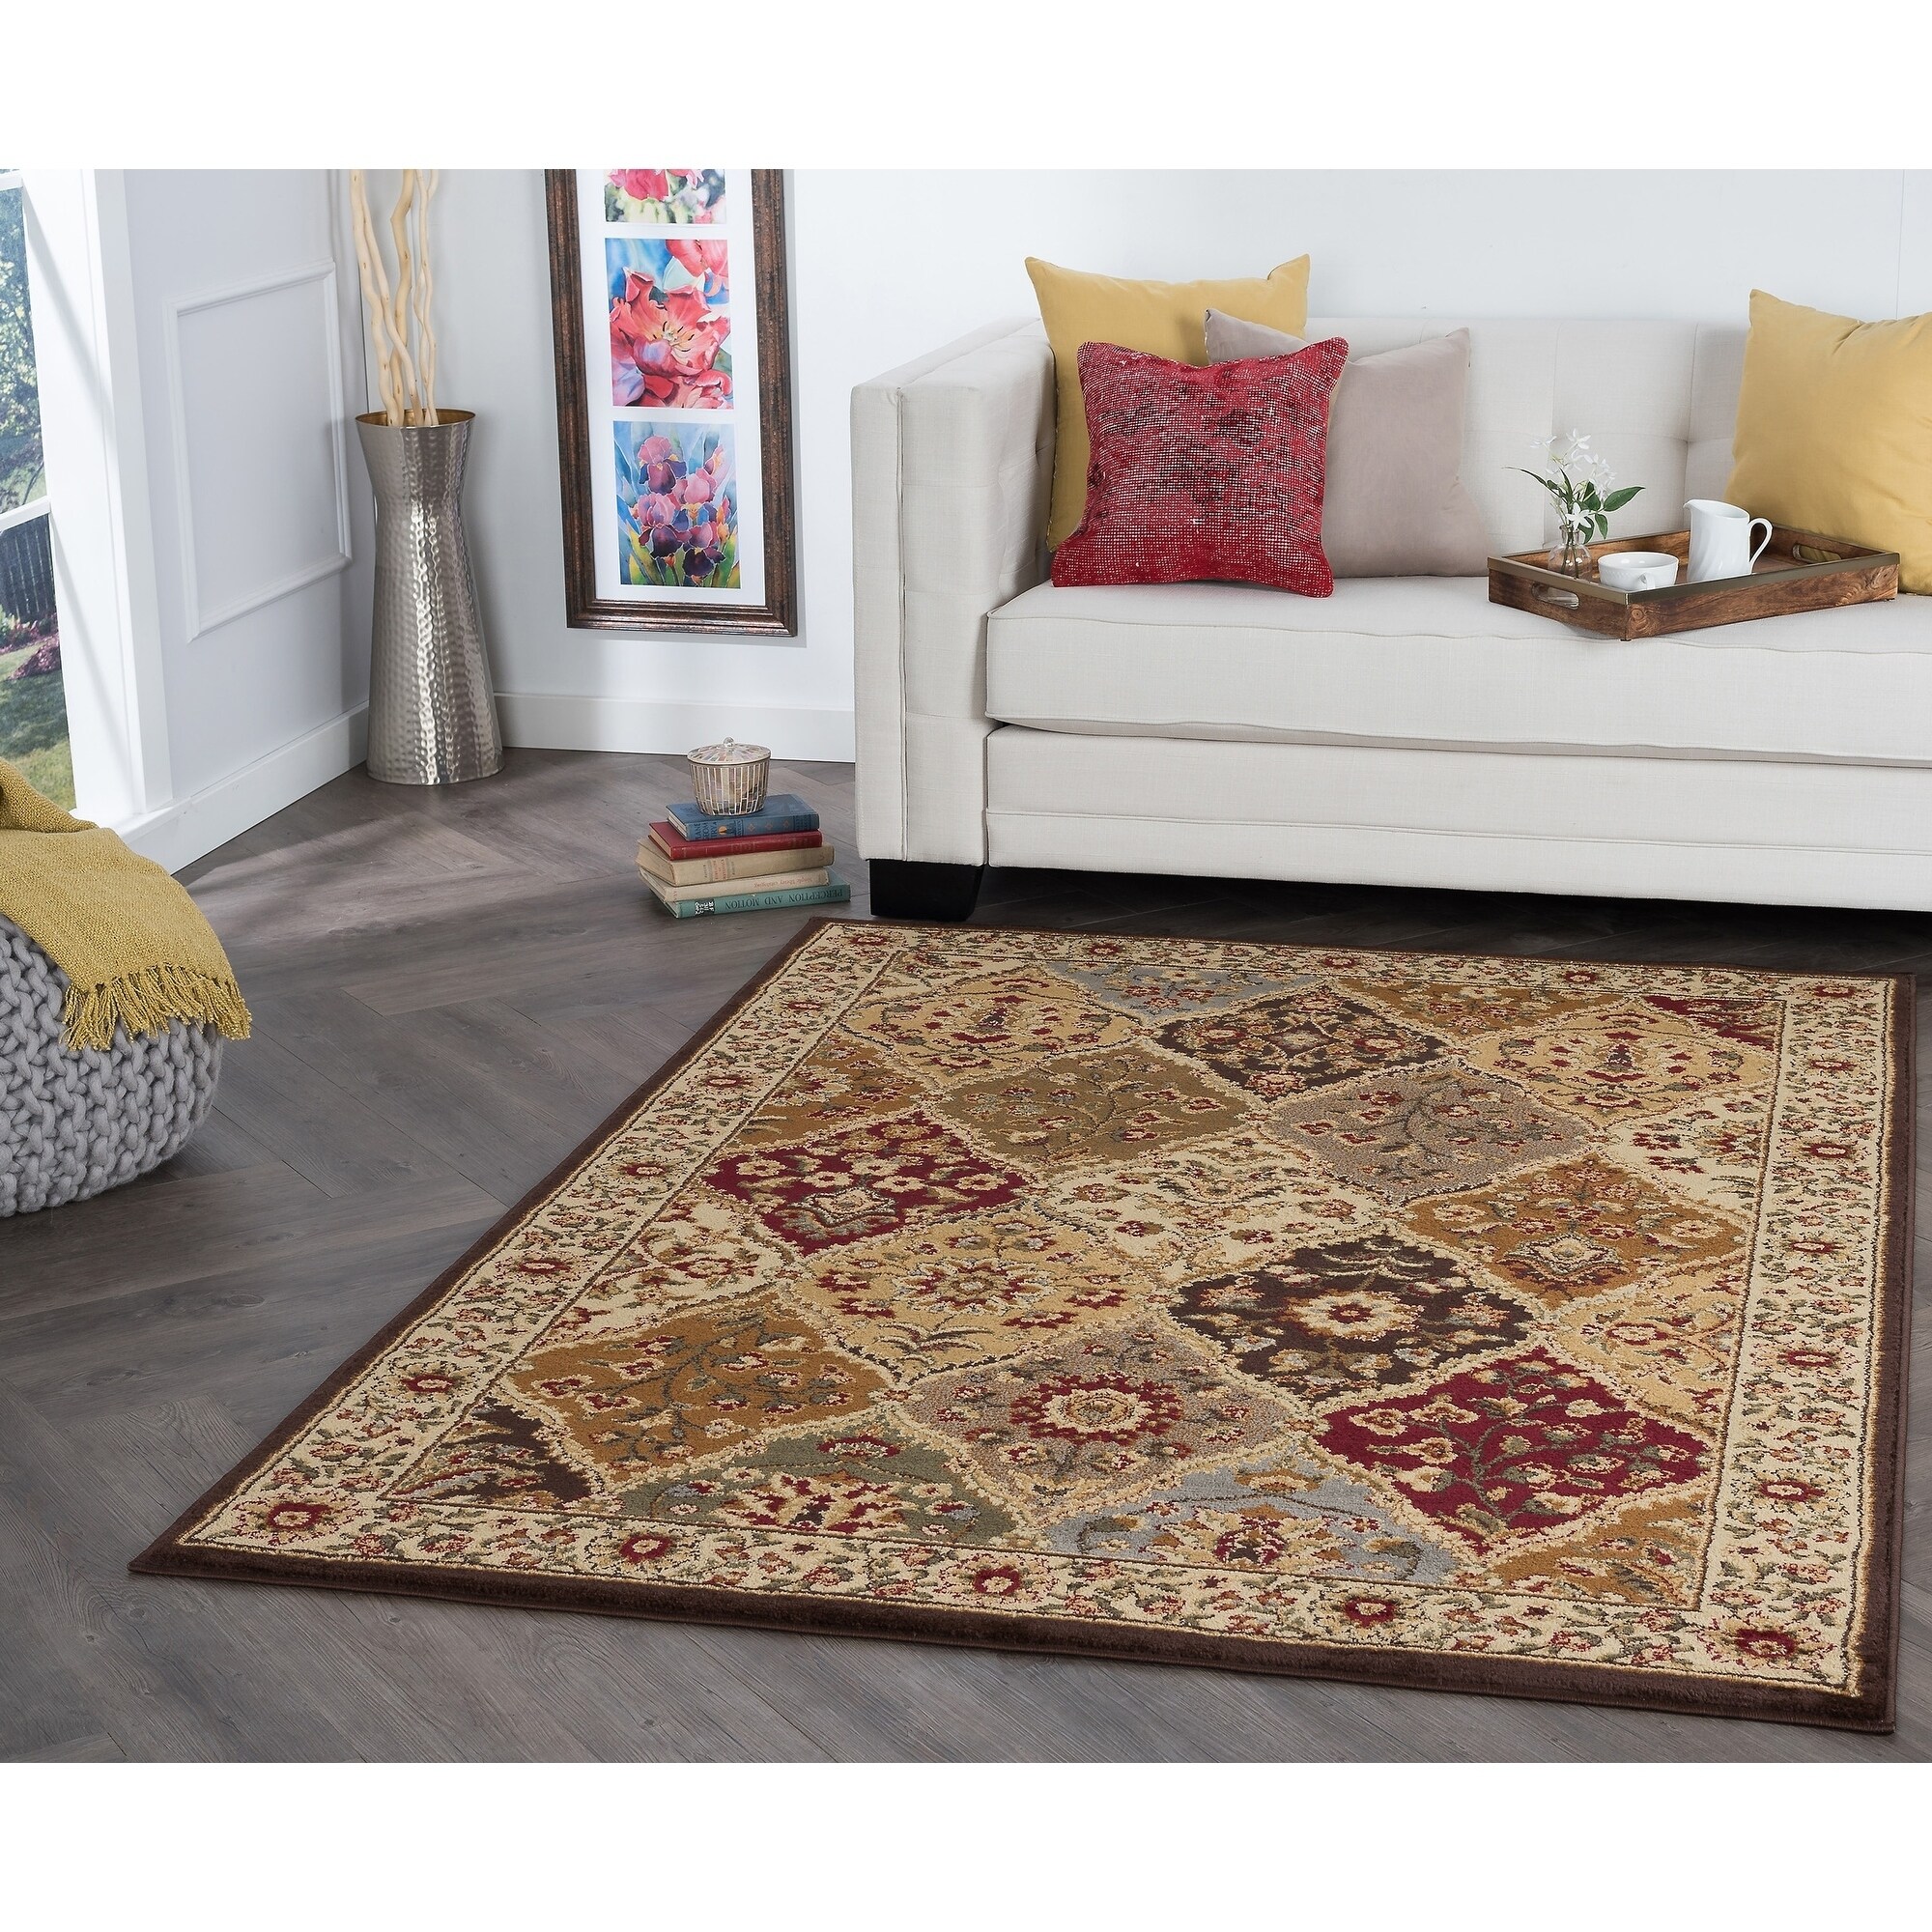 Rhythm 105120 Multi Traditional Area Rug (9 3 X 12 6) (MultiSecondary Colors Beige, red, brown, blue, greenShape RectangleTip We recommend the use of a non skid pad to keep the rug in place on smooth surfaces.All rug sizes are approximate. Due to the d